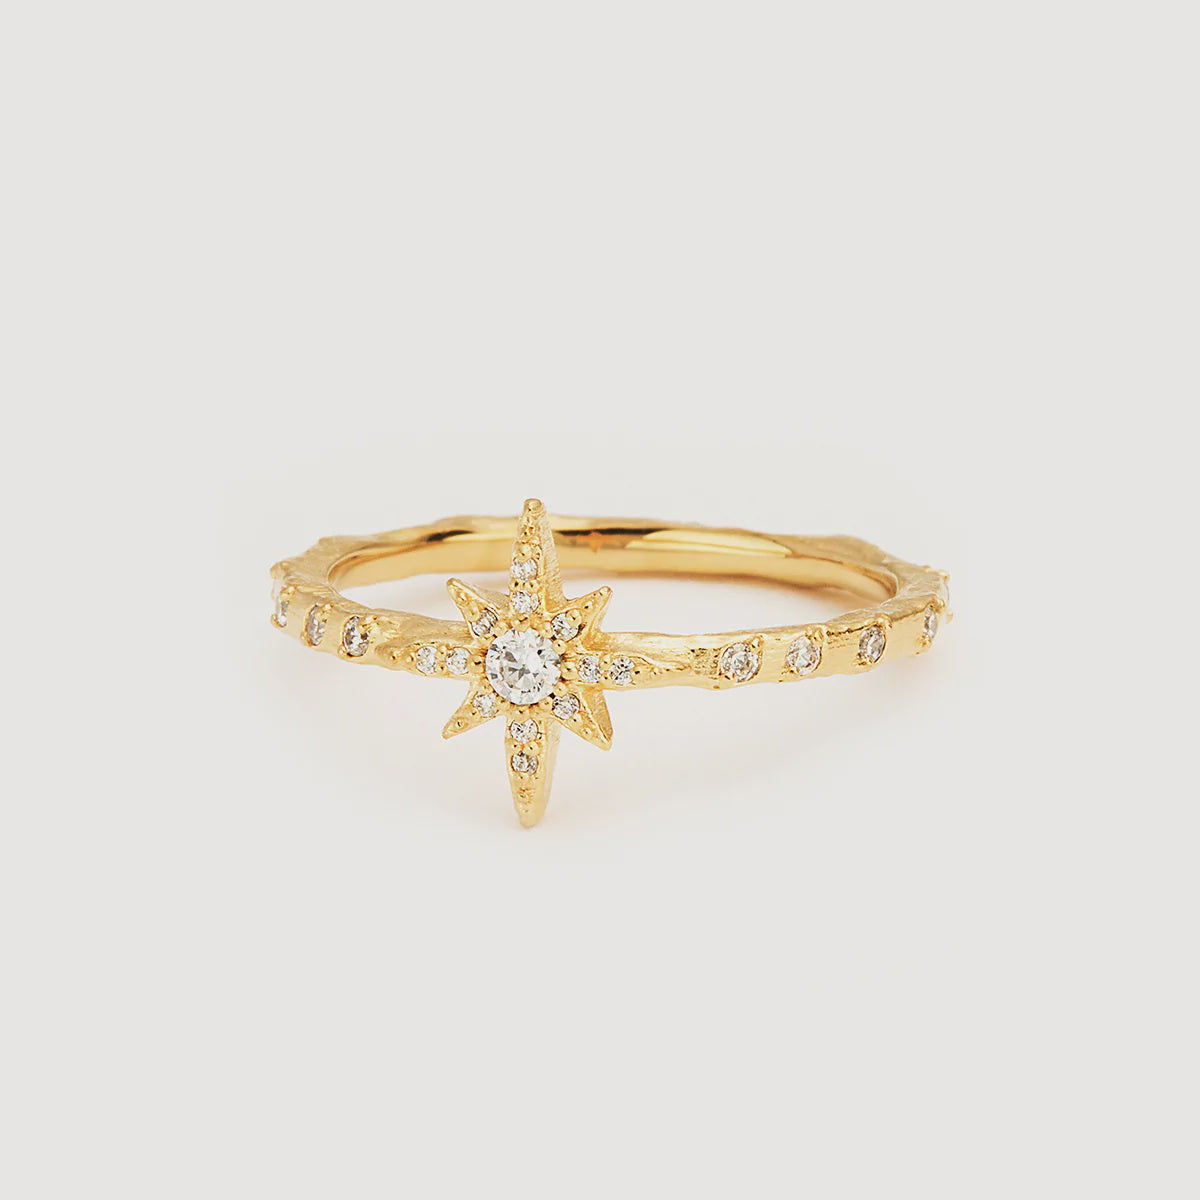 By Charlotte - Dancing in Starlight Ring Gold Vermeil